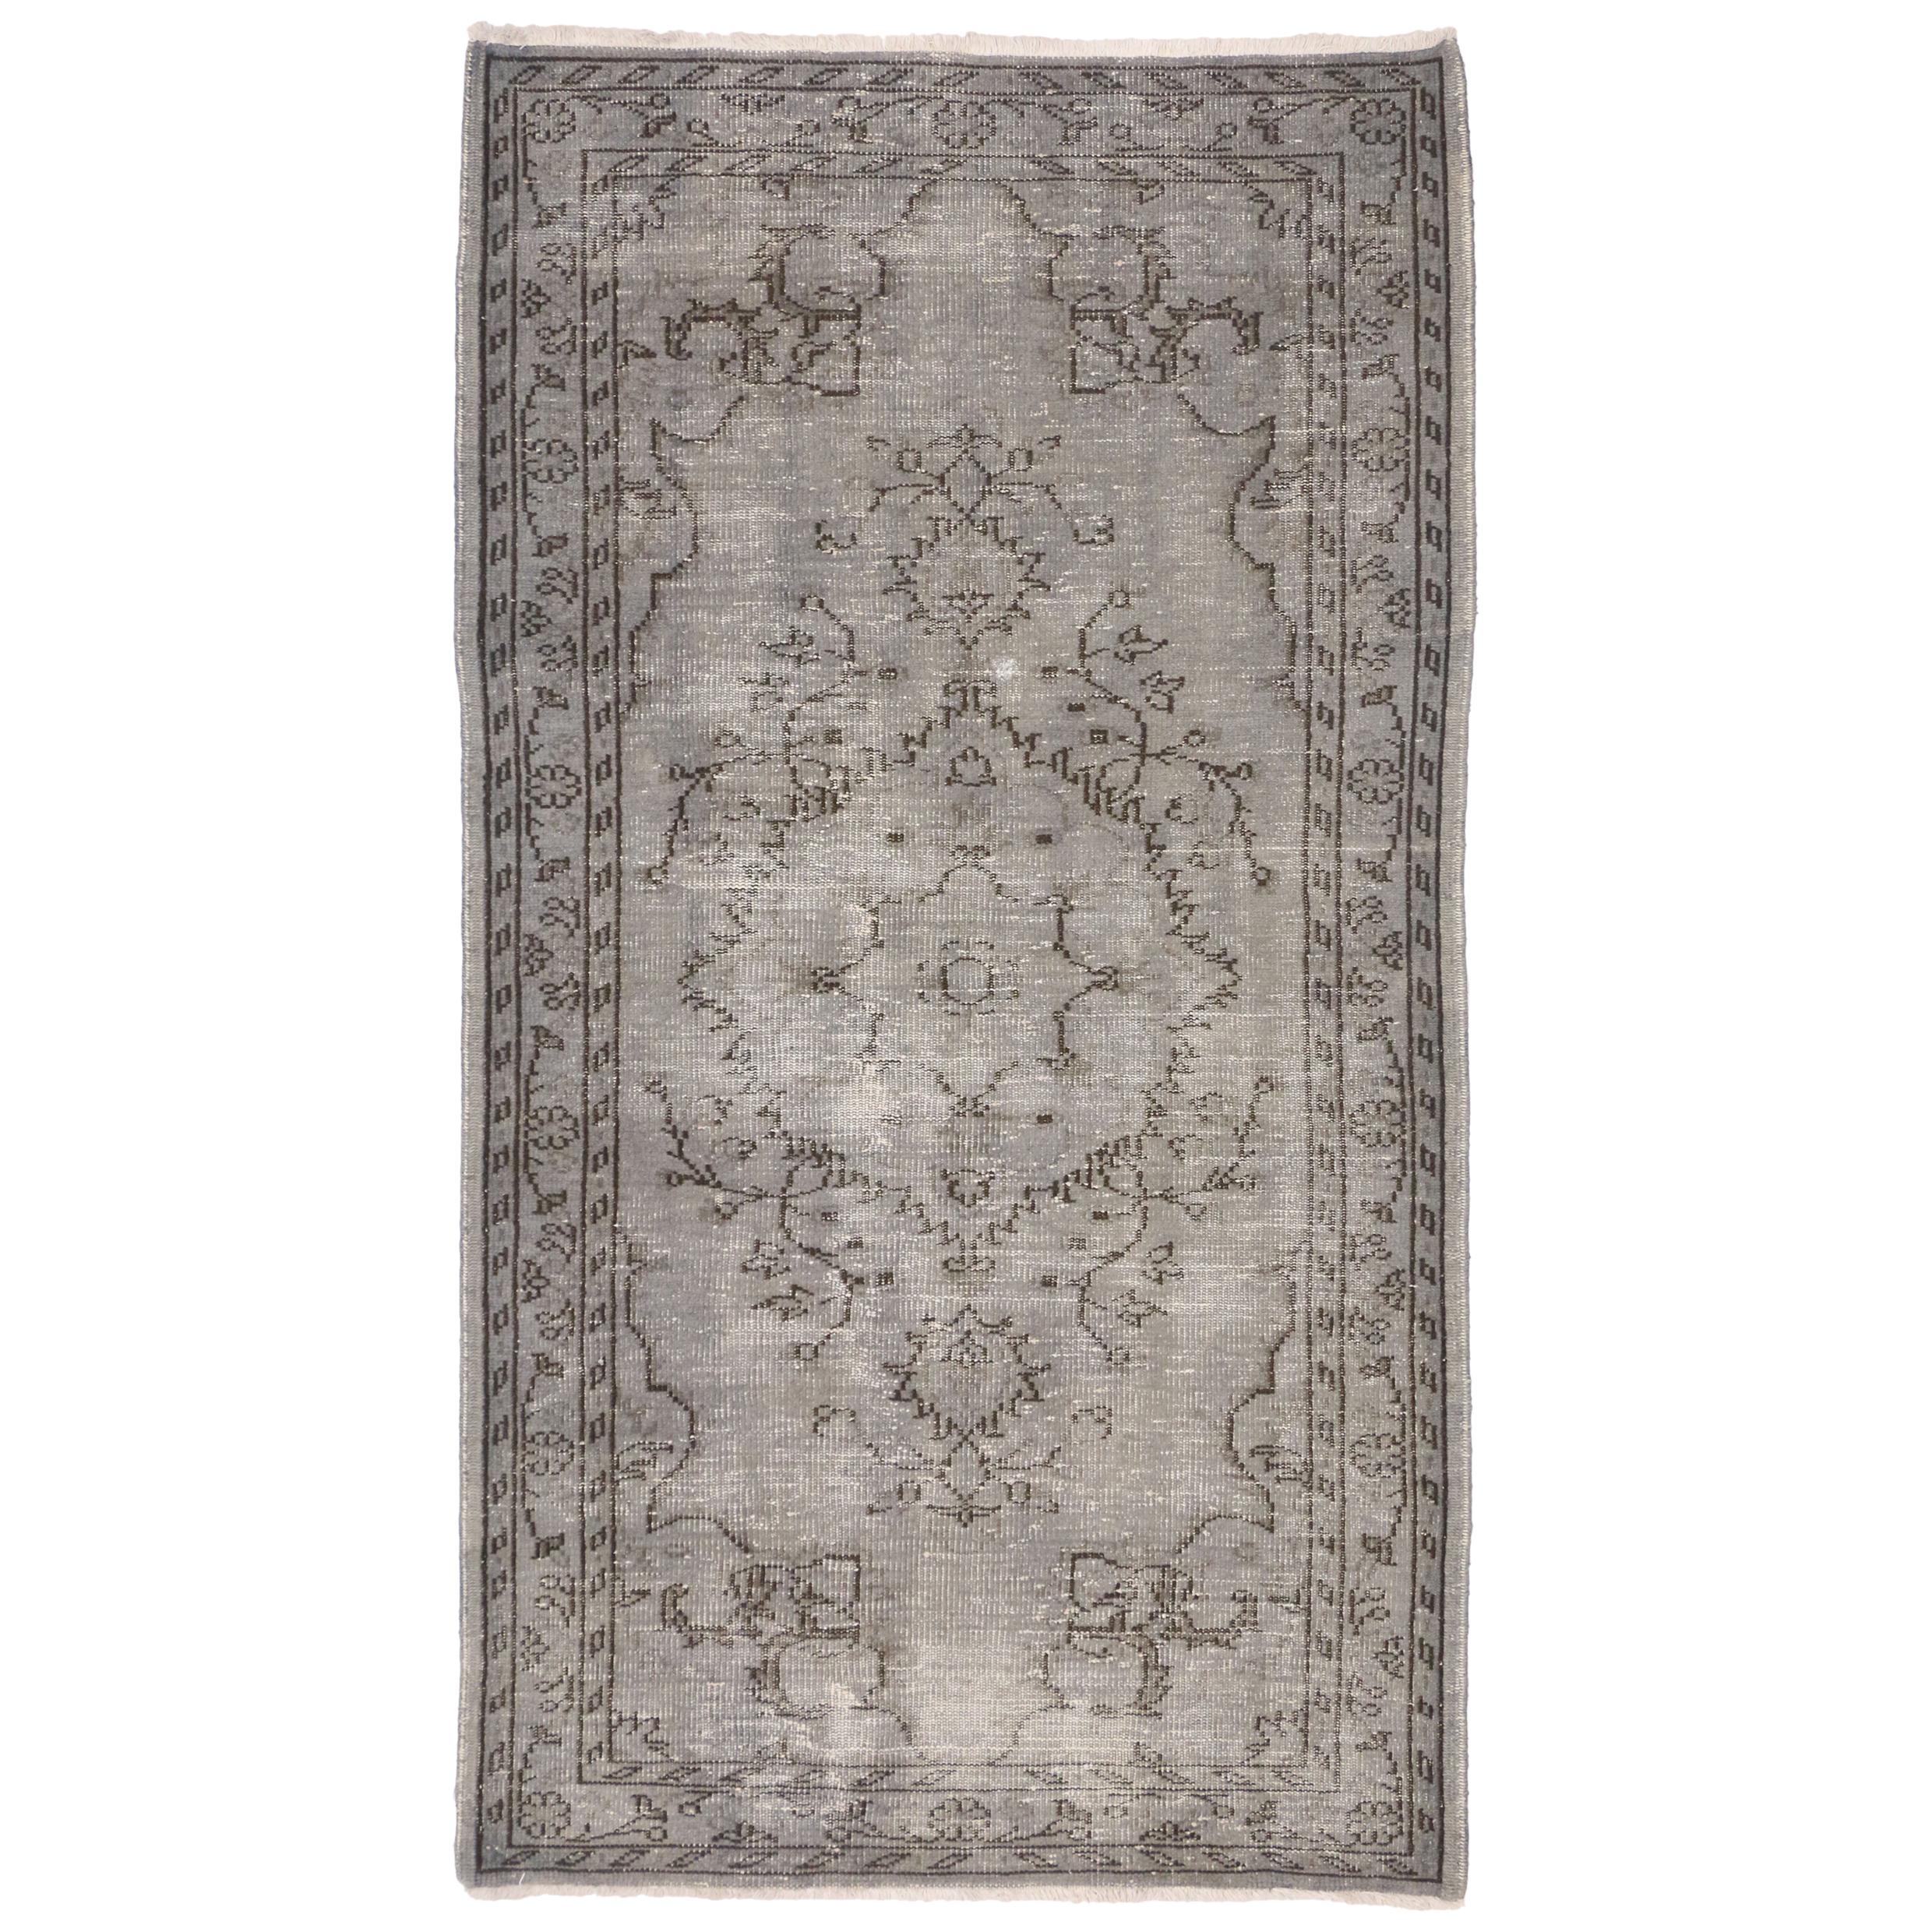 Distressed Vintage Turkish Overdyed Gray Rug with Feminine Industrial Style